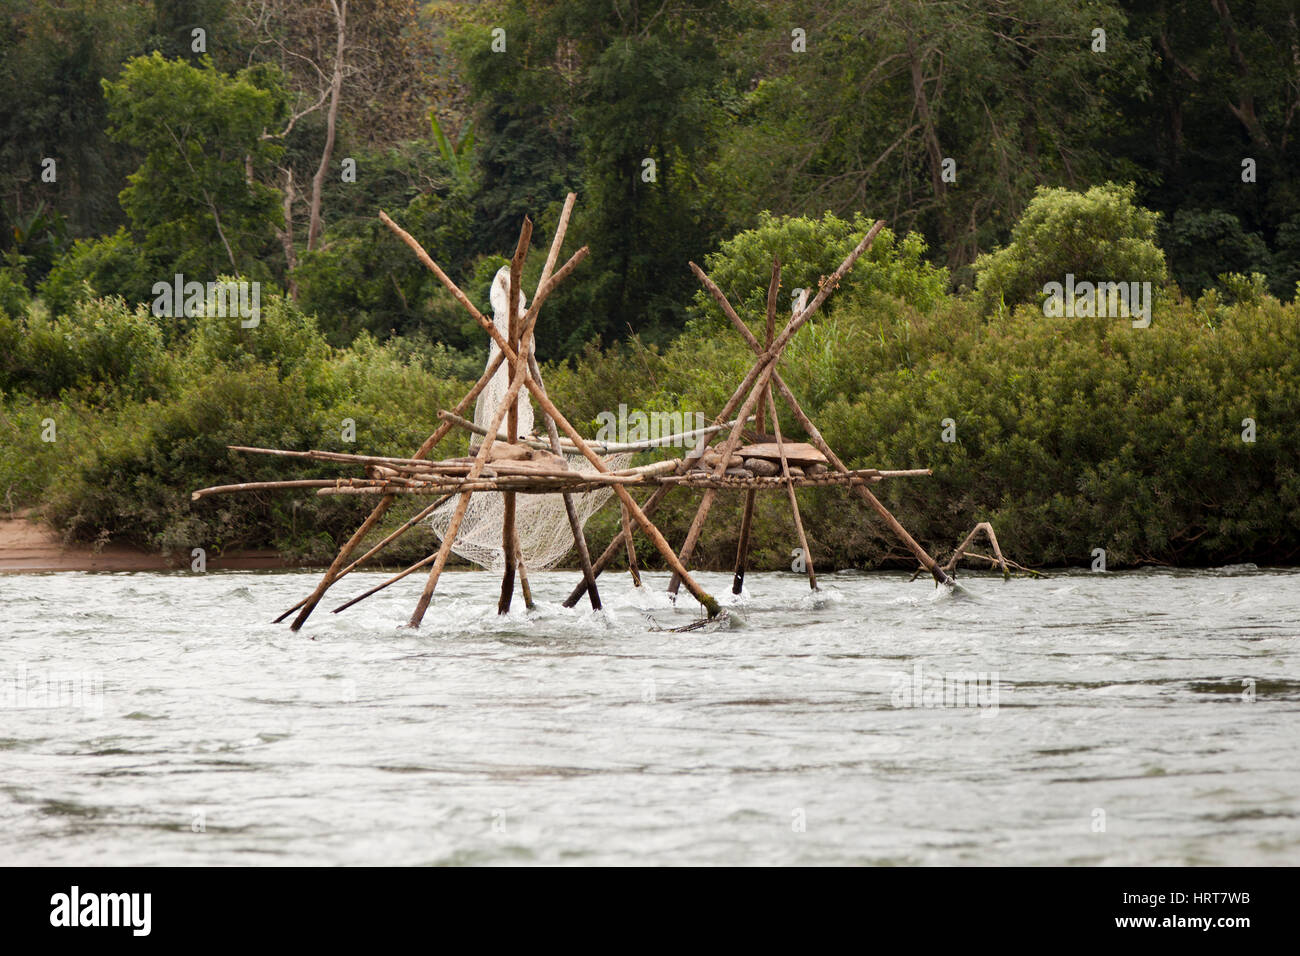 A branch structure with net for a fish trap on the Ou river, a tributary of the Mekong. Structure faite de branches et filet pour un piège à poissons. Stock Photo